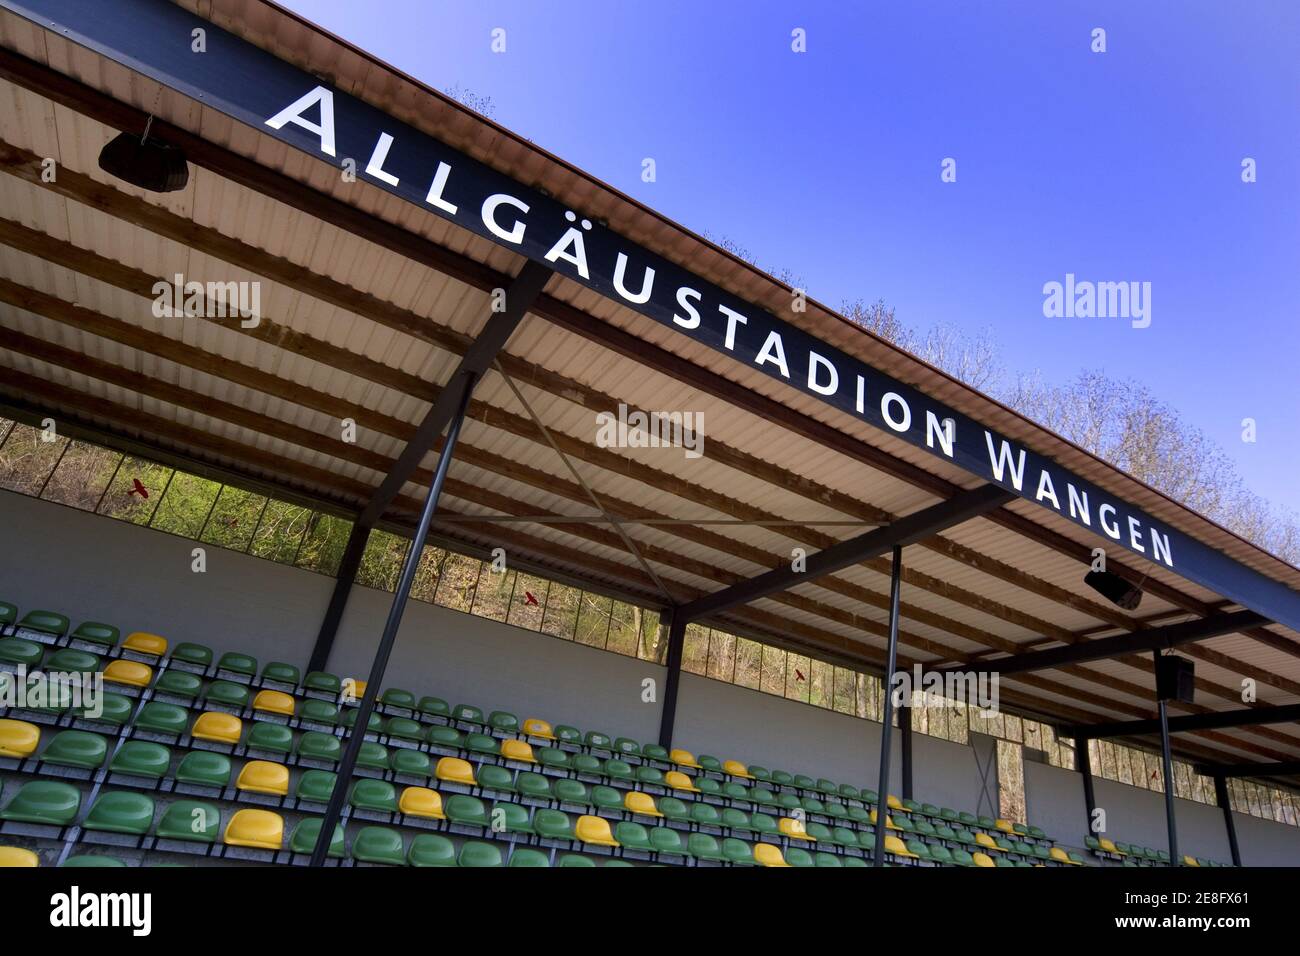 A general view shows a part of the stadium in Wangen near lake Constance April 21, 2006. The Togo national soccer team will be practising at the stadium for the duration of the World Cup 2006 tournament.  WORLD CUP 2006 PREVIEW TRAINING GROUND   REUTERS/Miro Kuzmanovic Stock Photo